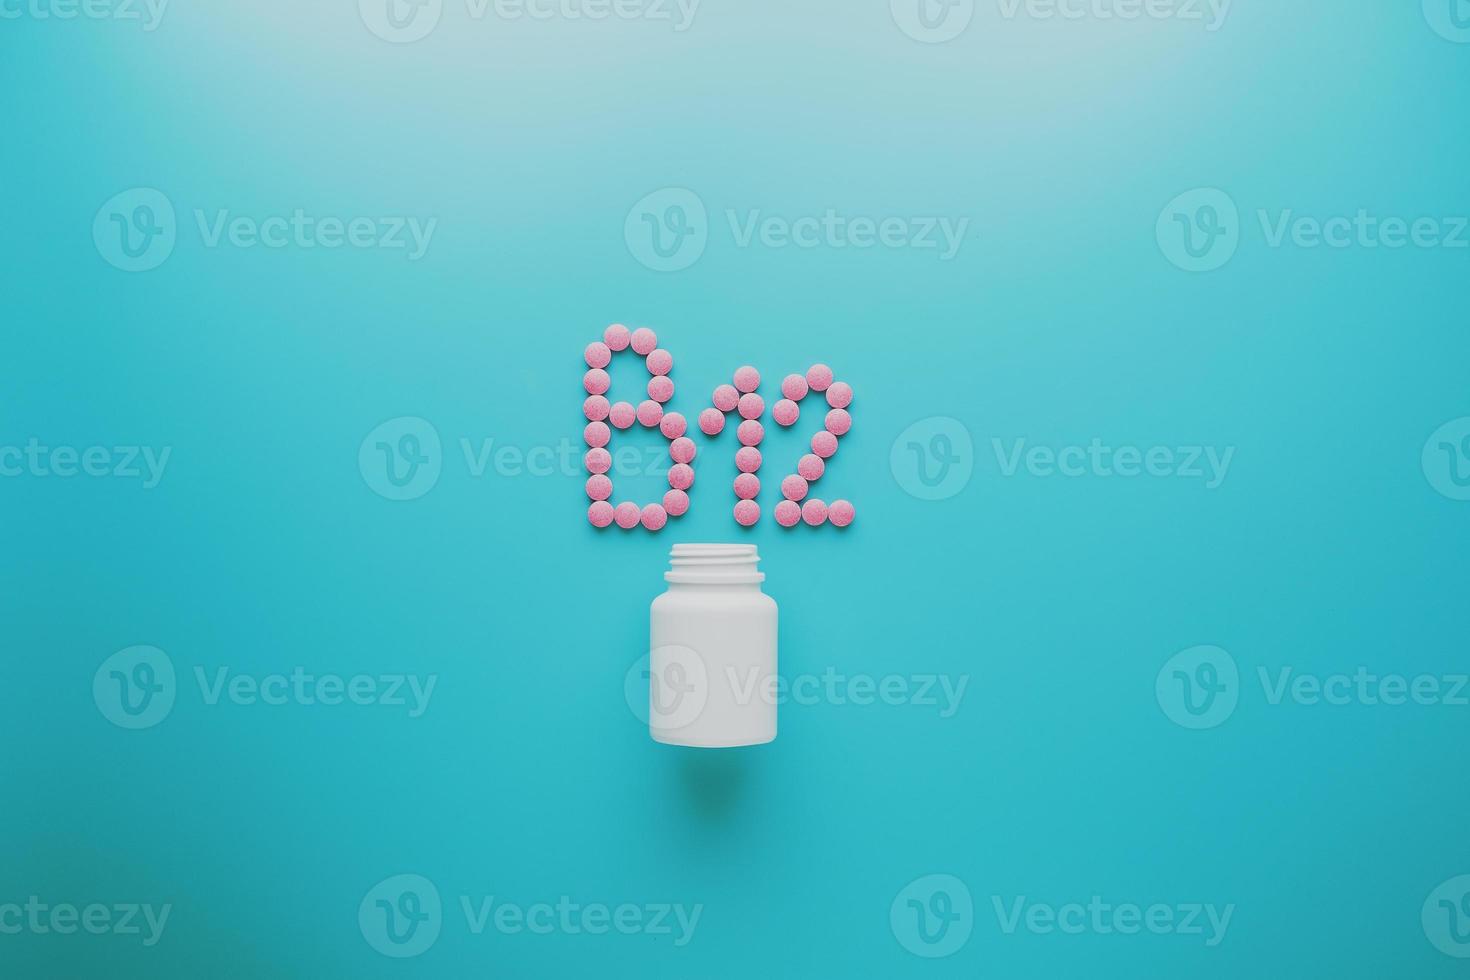 Pink pills in the shape of the letter B12 on a blue background, spilled out of a white can, low contrast photo